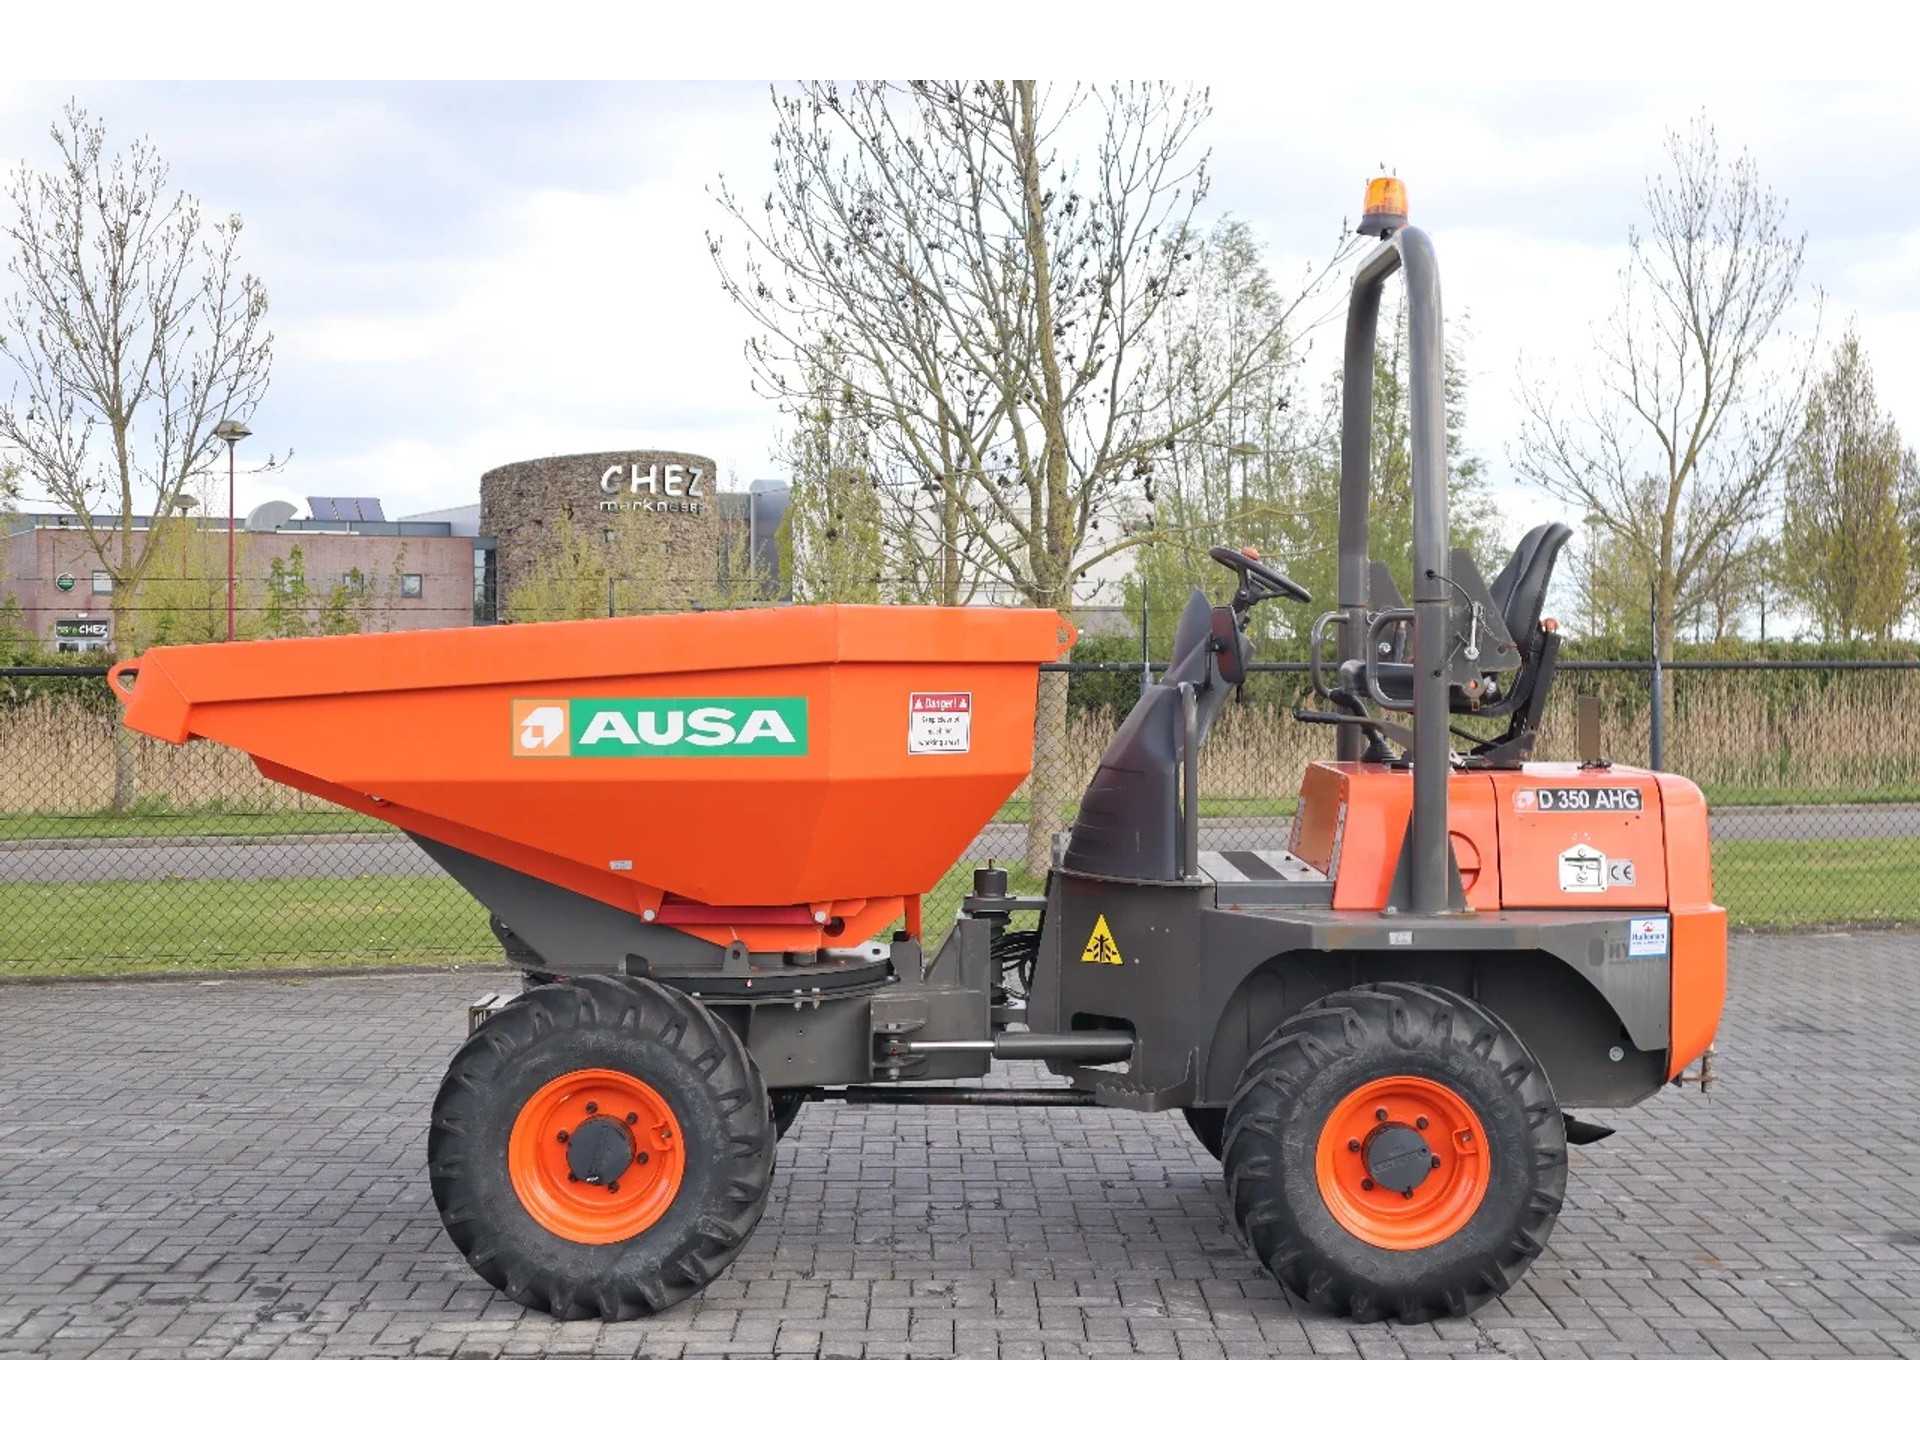 AUSA D350 AHG | 85 HOURS! | 3.5 TON PAYLOAD | SWING BUCKET